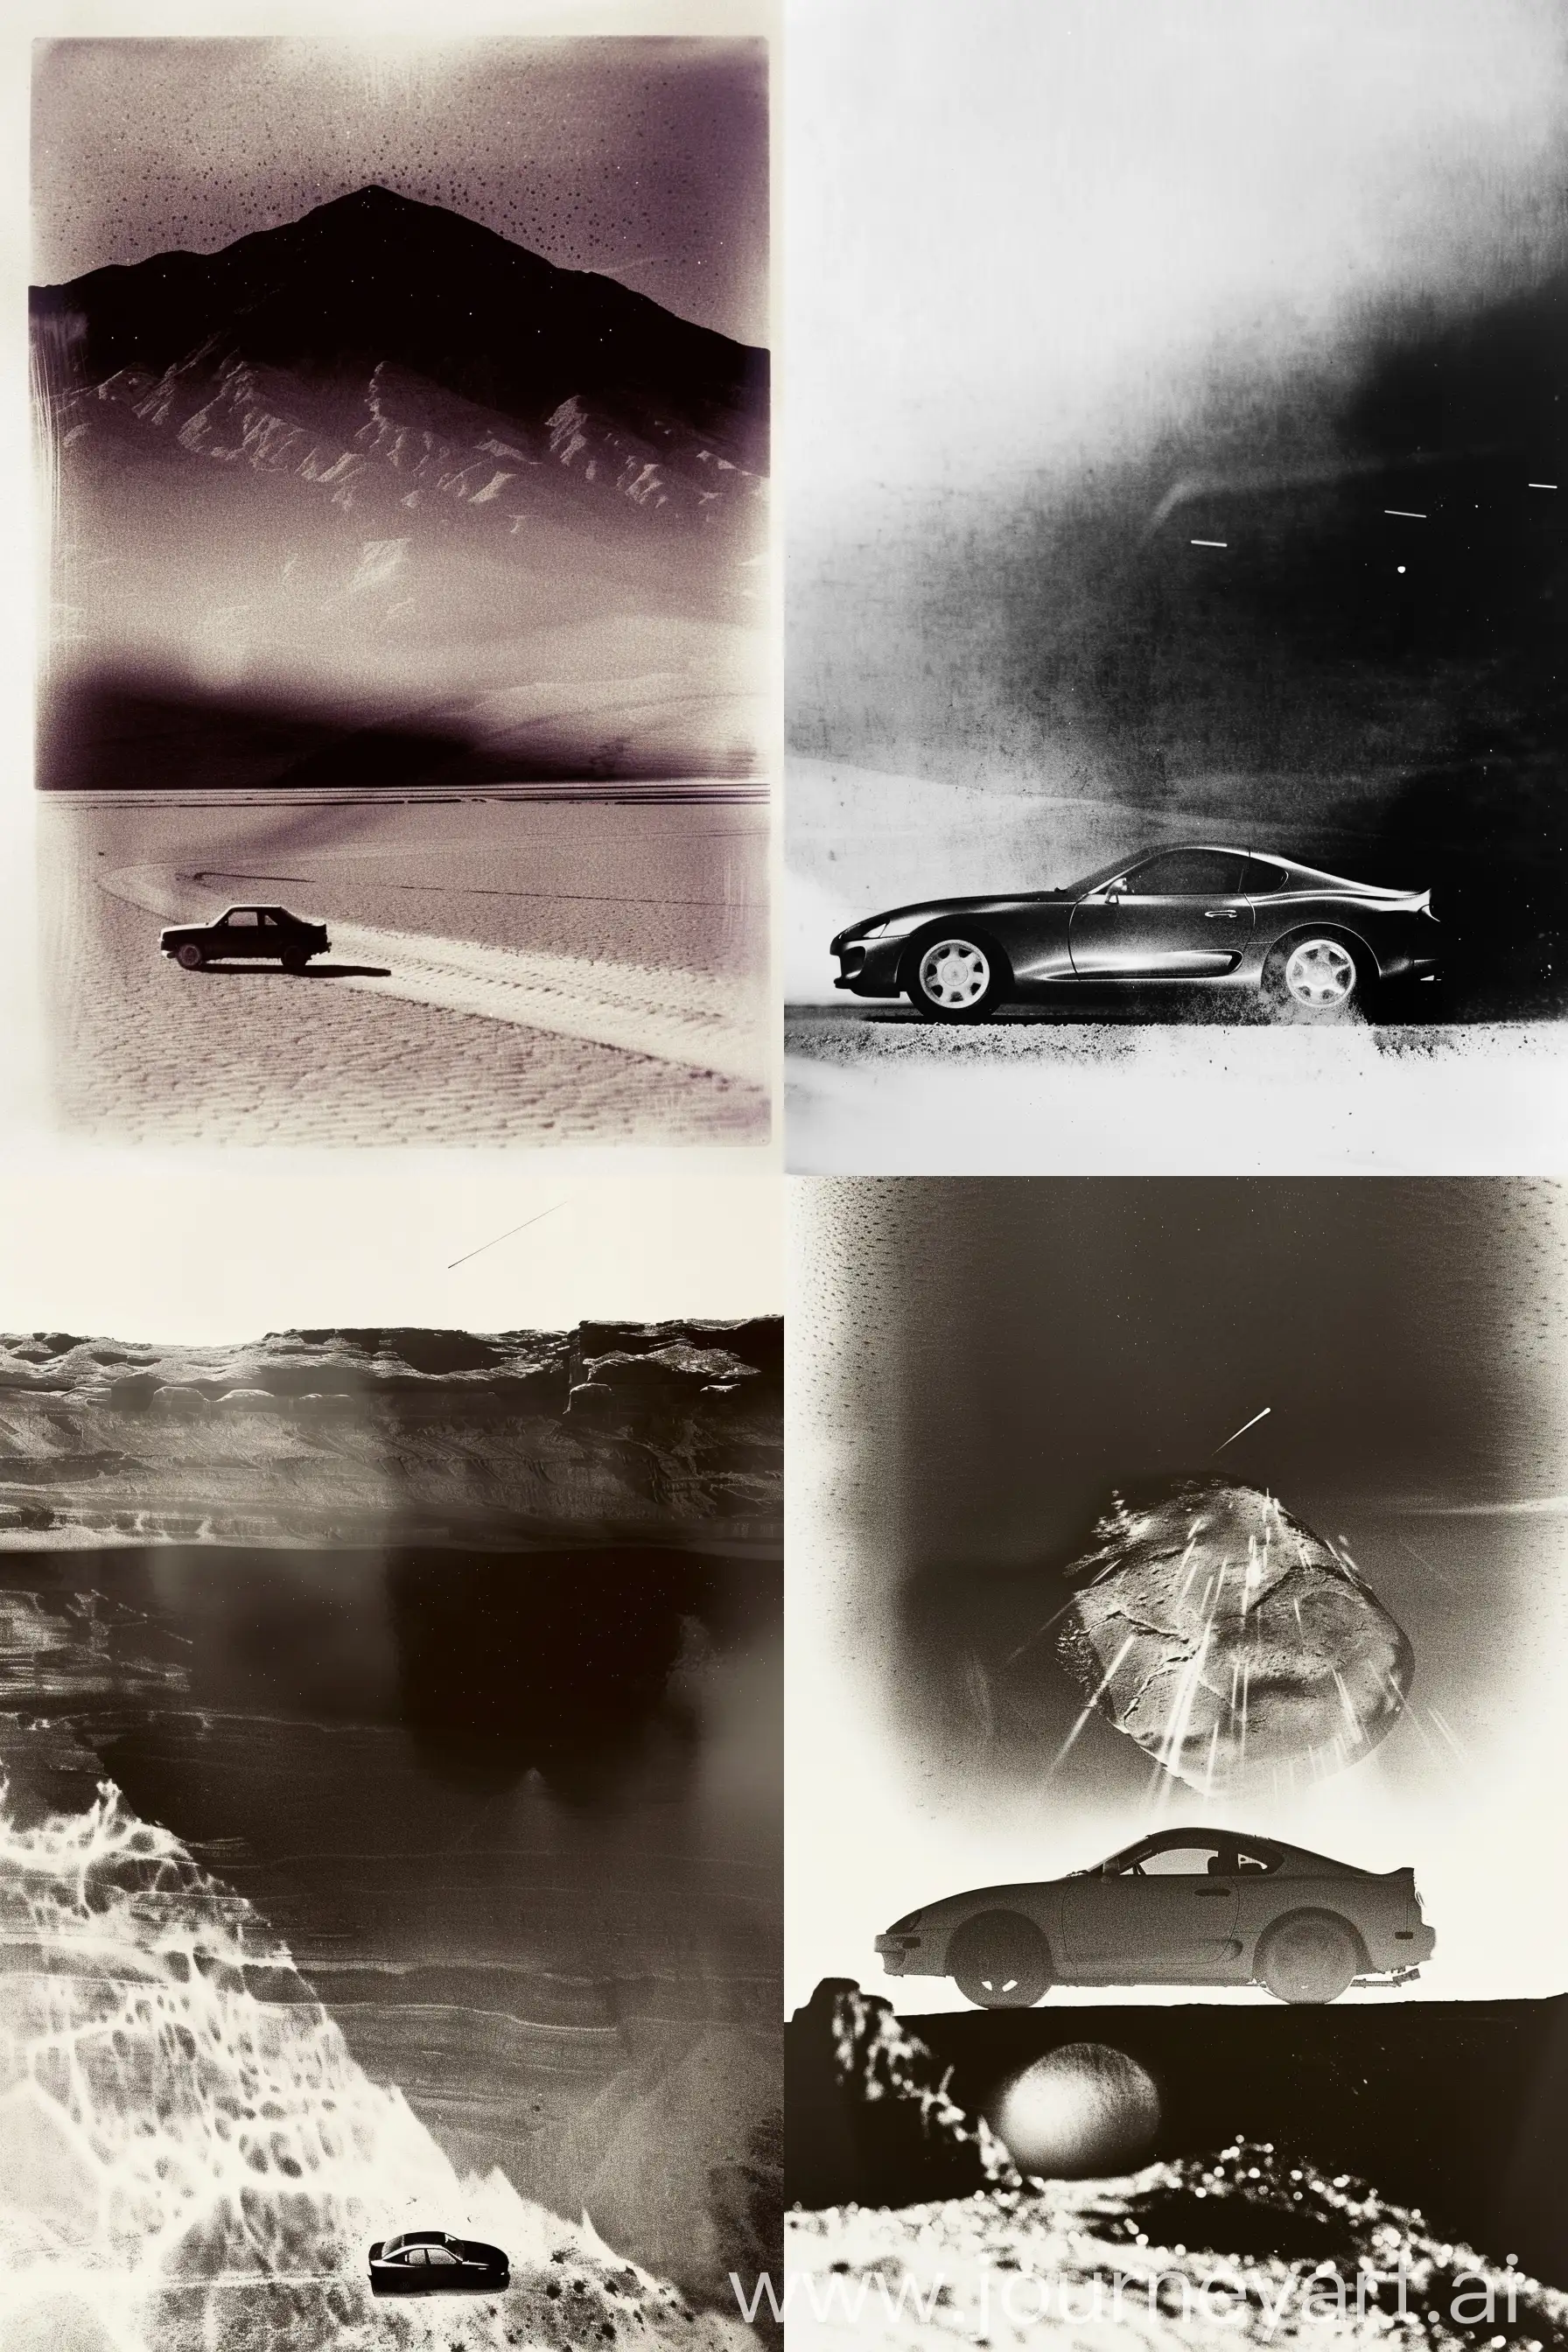 Monochrome-Supra-in-Desert-with-Giant-Cave-and-Meteor-Shower